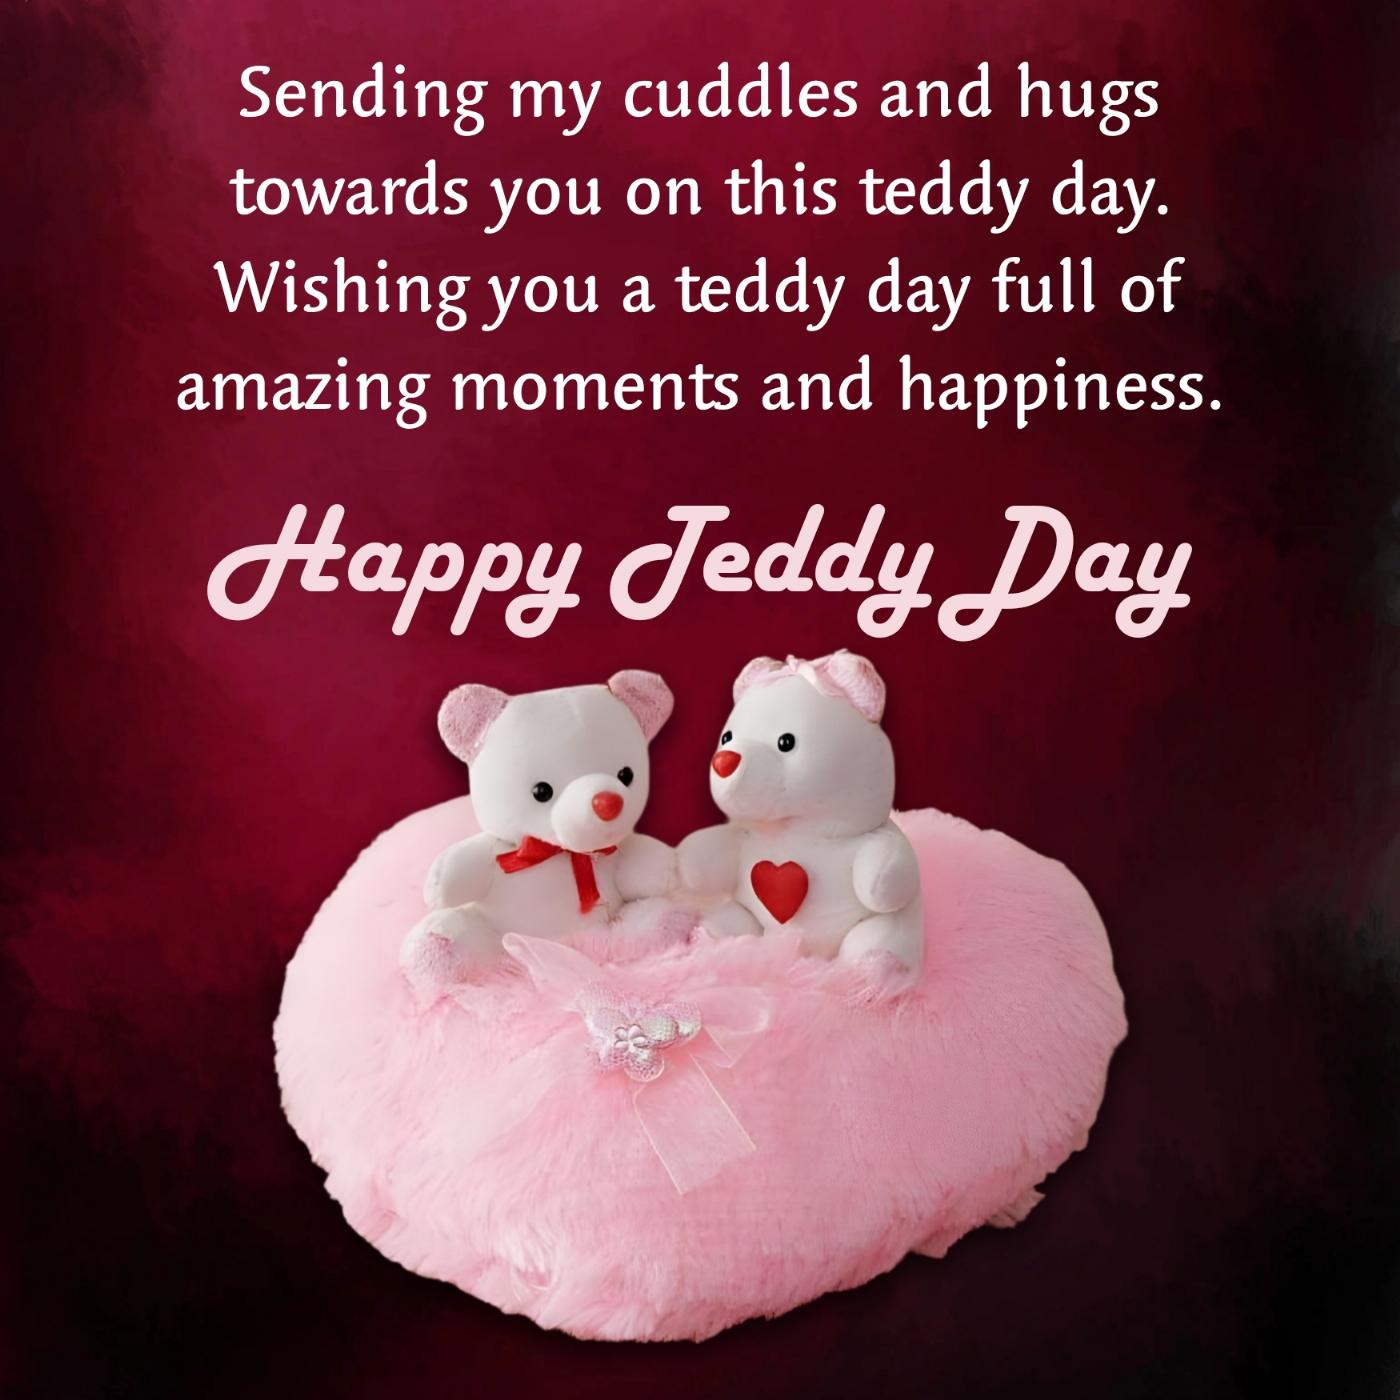 Sending my cuddles and hugs towards you on this teddy day